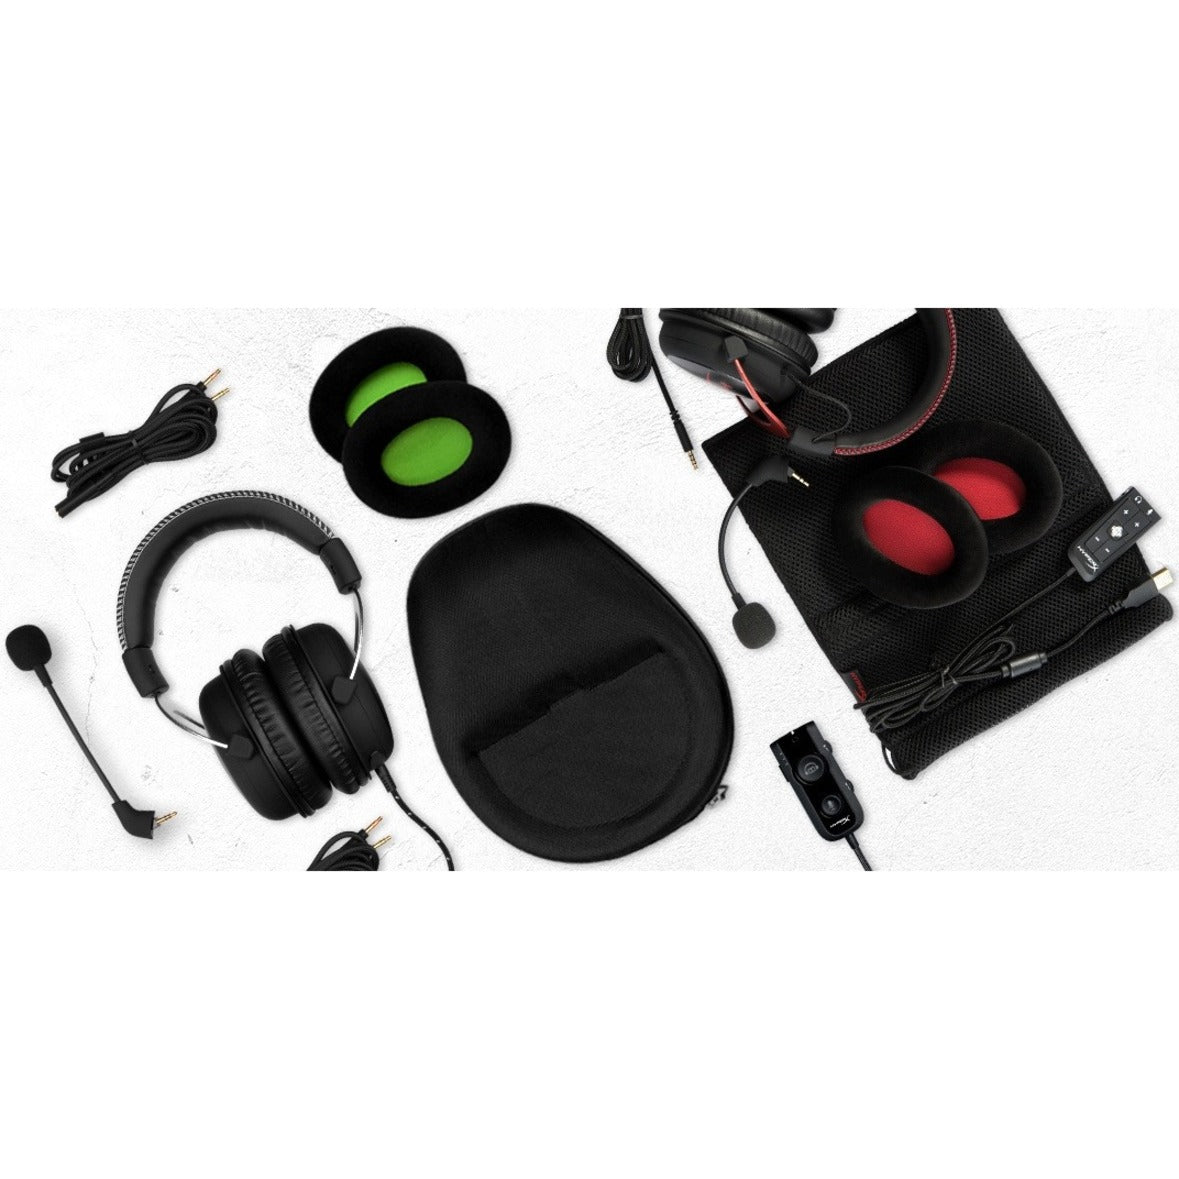 HyperX 4P5J9AA CloudX Stinger Core Xbox Gaming Headset, Wired Stereo Headset with Swivel Microphone Mute, Black/Green